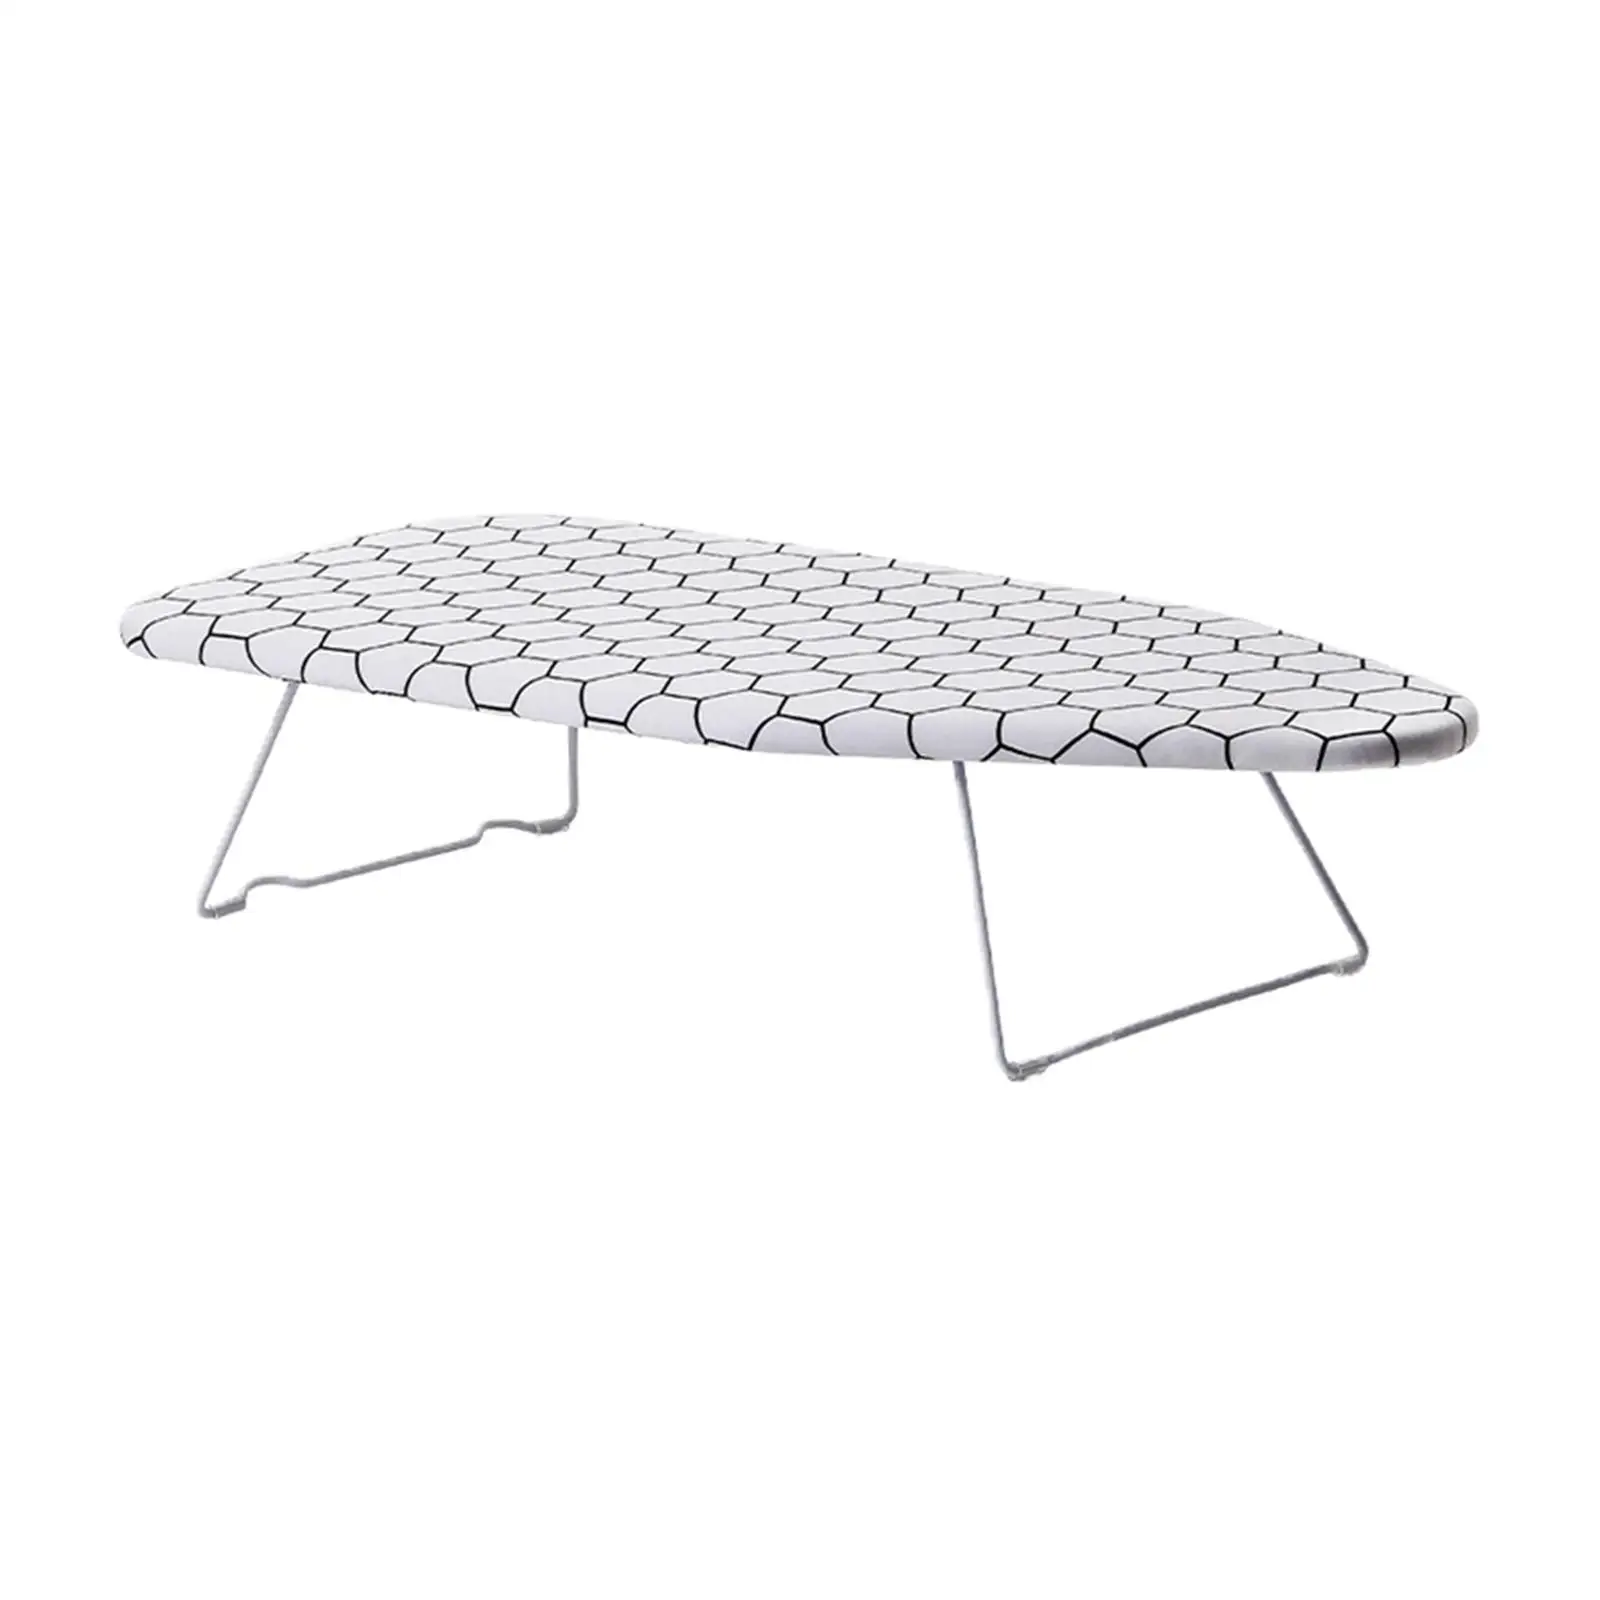 Tabletop Ironing Board with Foldable Legs, Heat Resistant Cover for Laundry Room Living Room Apartments Dorm Home